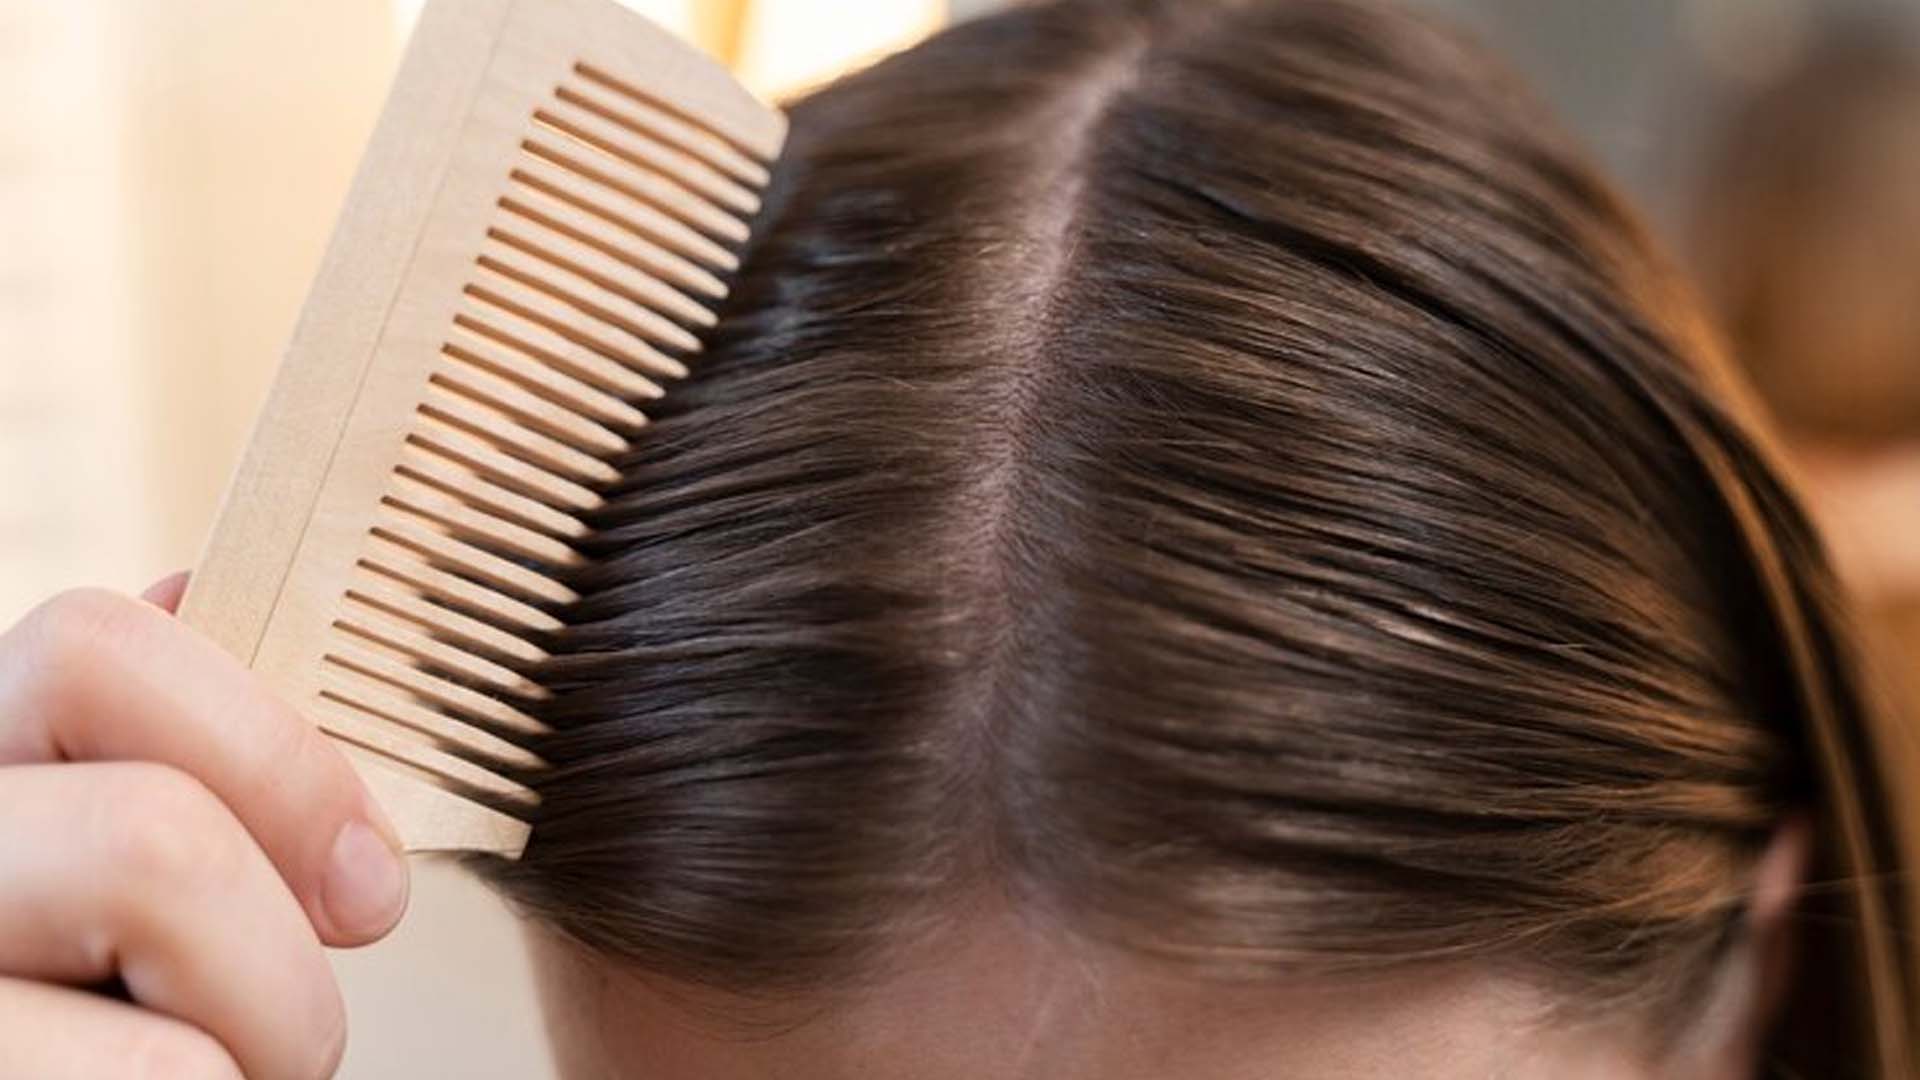 Women Showing her Scalp with Comb